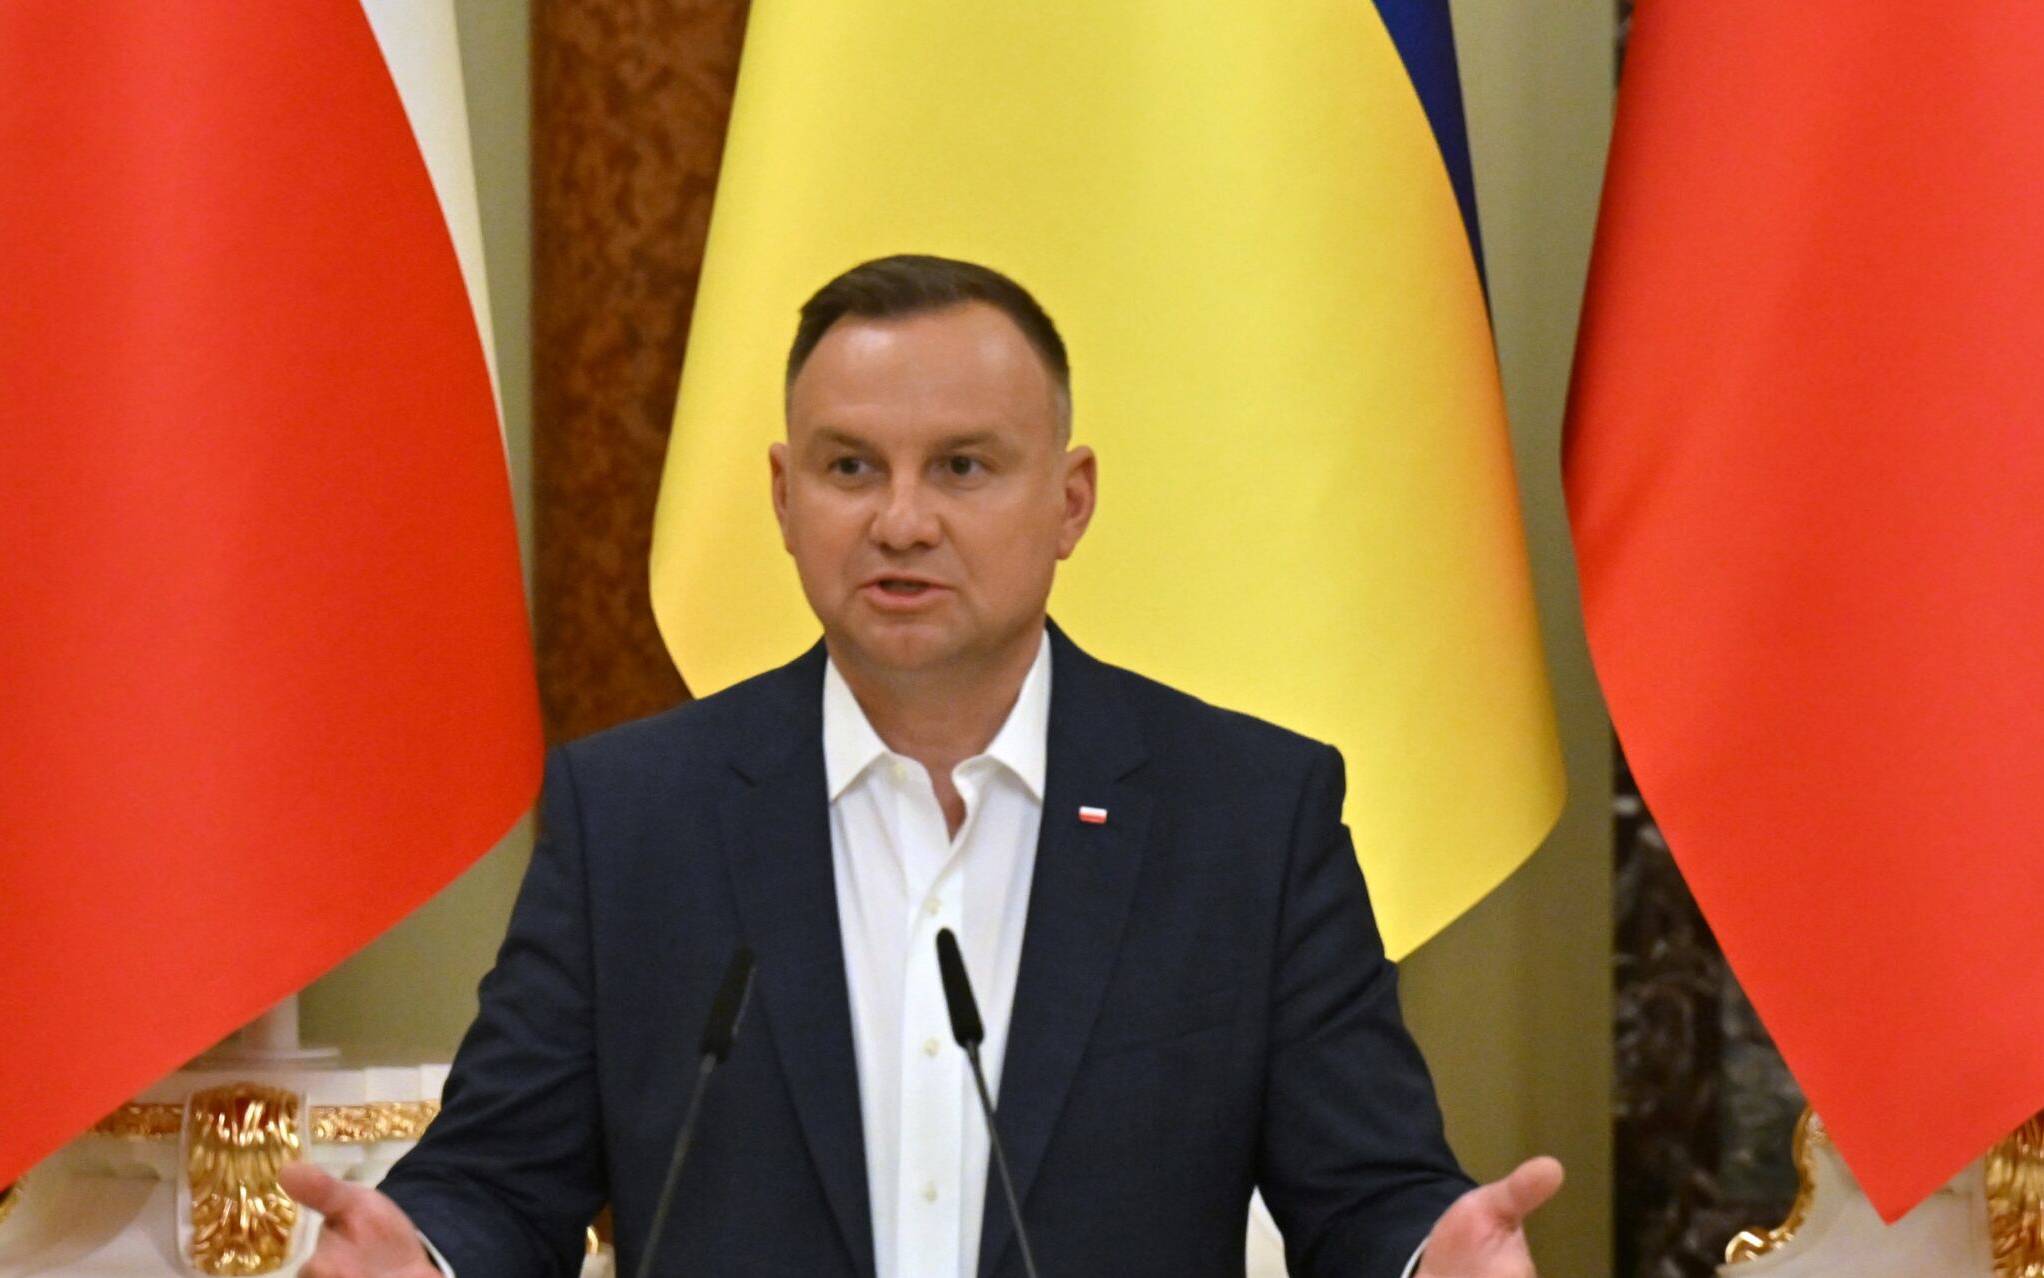 Polish President Andrzej Duda gives a press-conference following his meeting with his Ukrainian counterpart in Kyiv on May 22, 2022. (Photo by Sergei SUPINSKY / AFP)